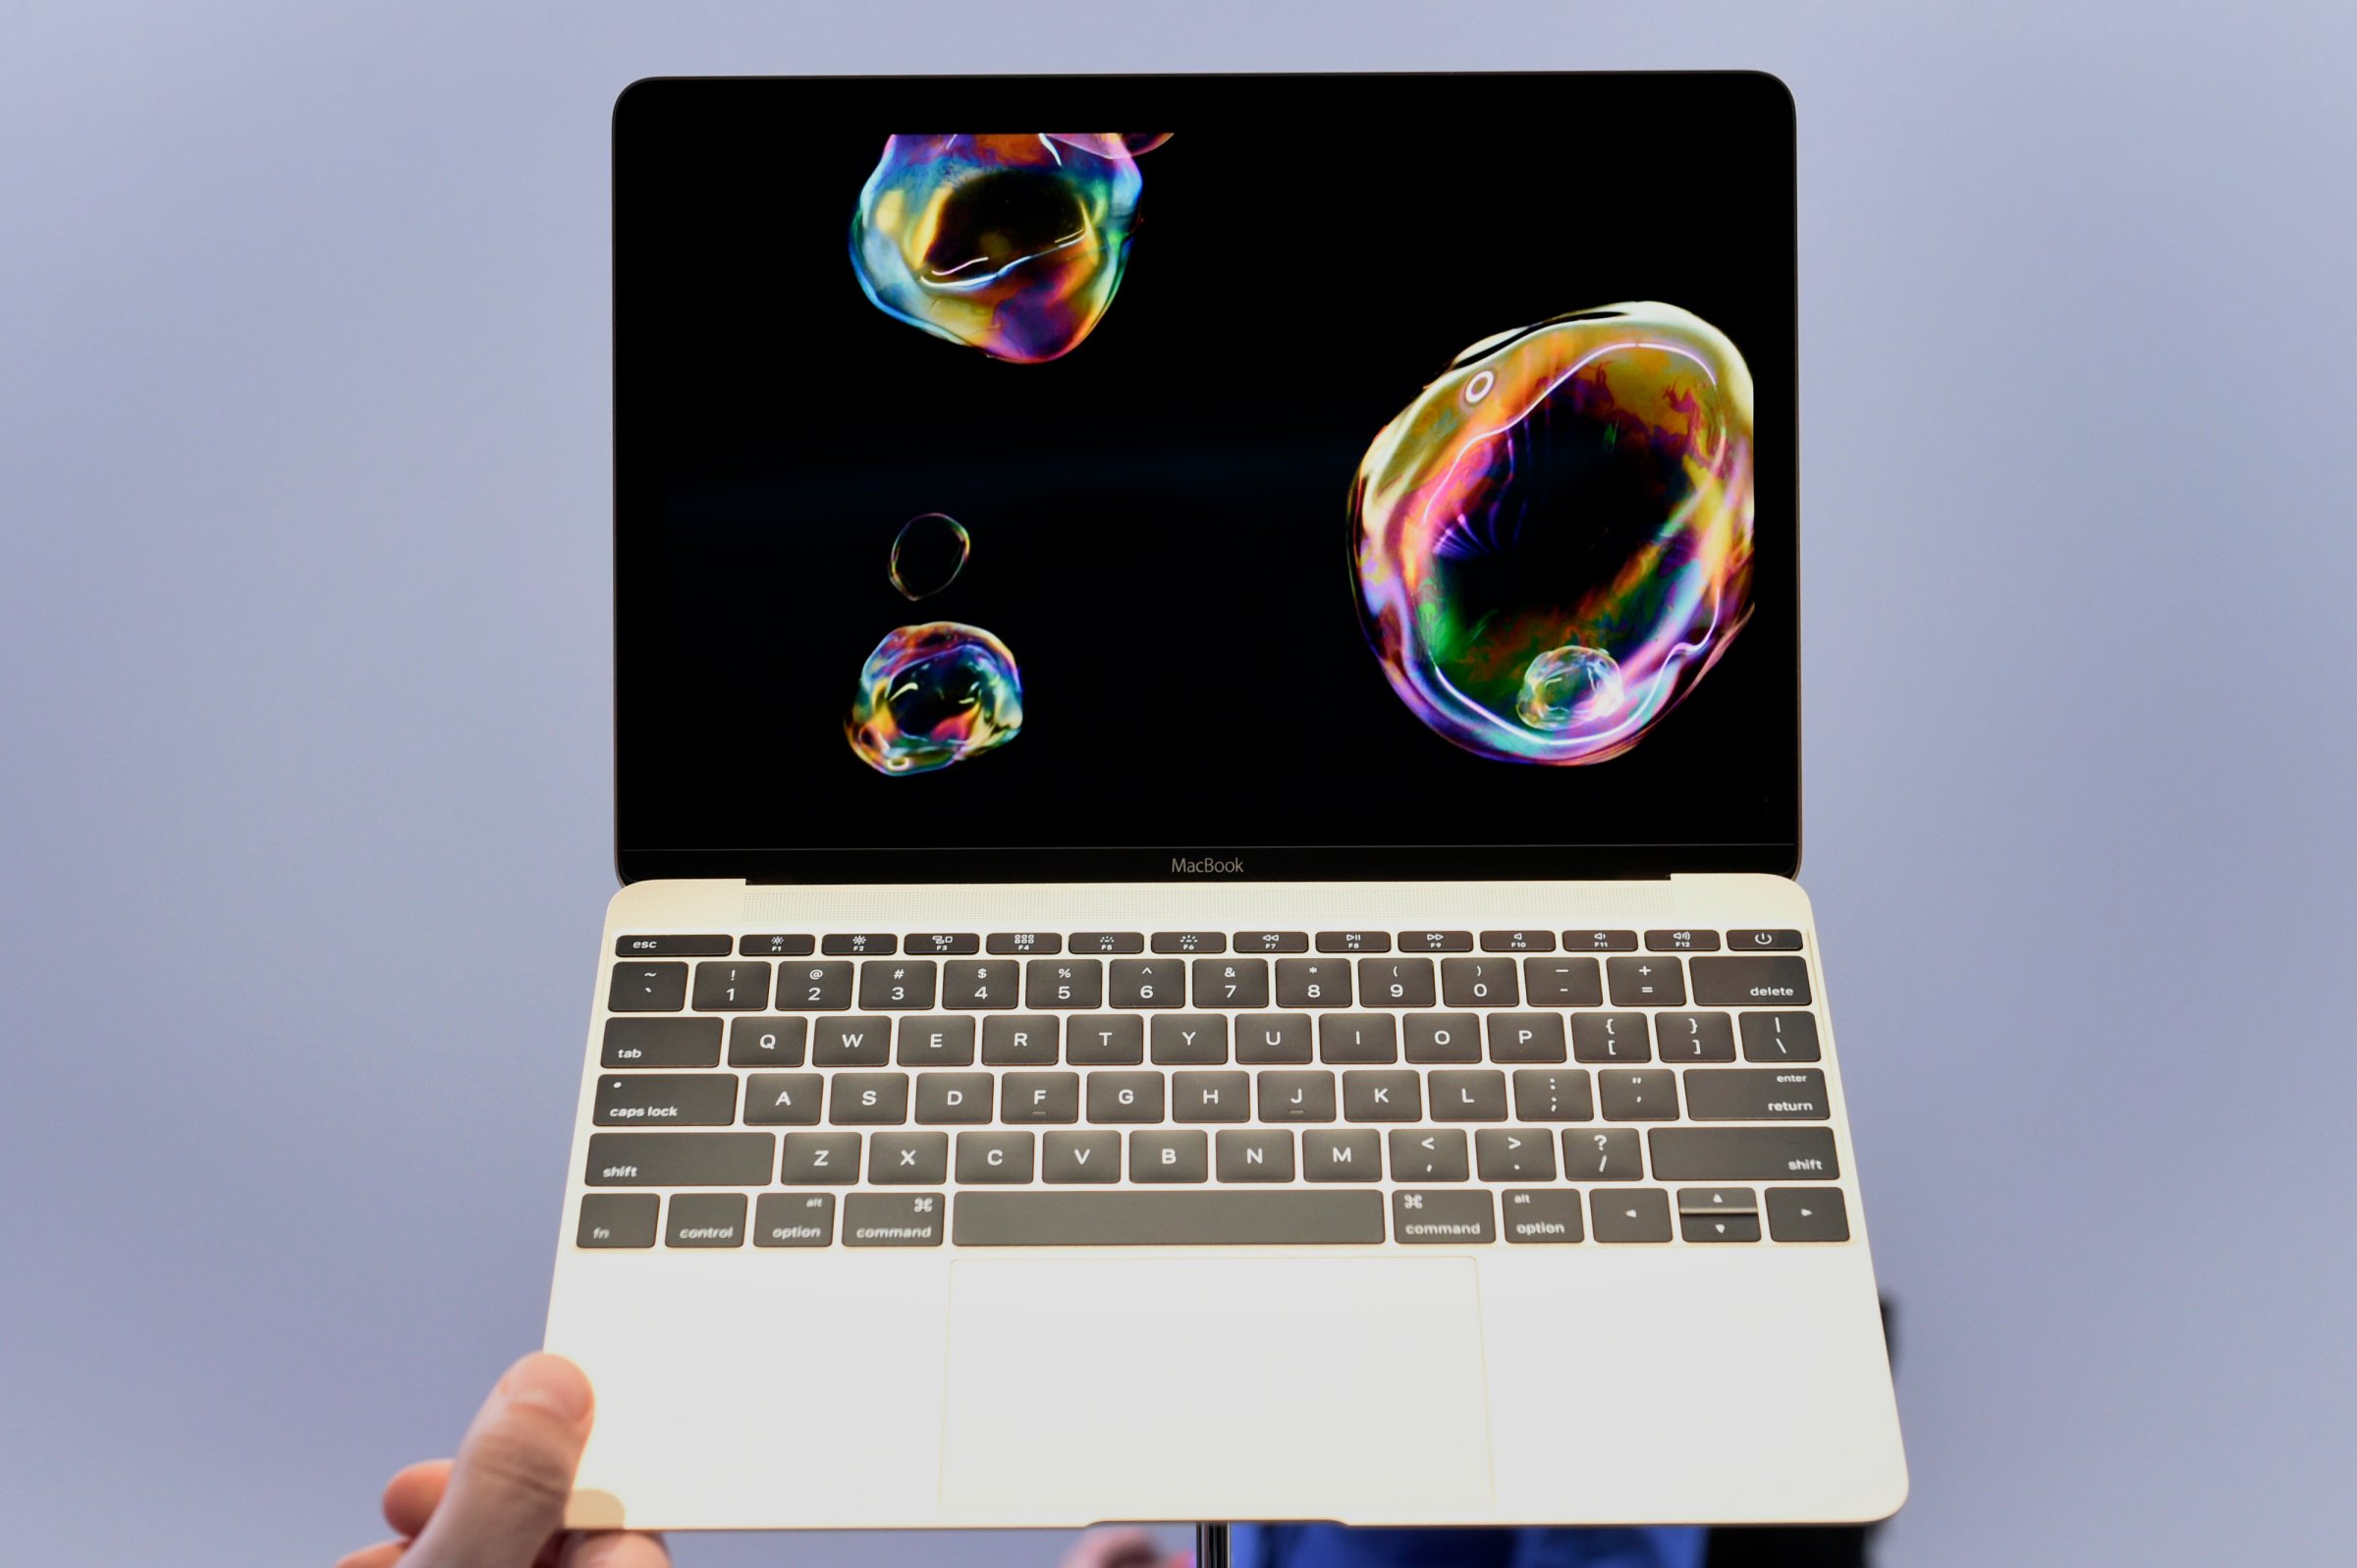 The new gold edition Macbook laptop is displayed during the Apple Inc. Spring Forward event in San Francisco, California, U.S., on Monday, March 9, 2015. Apple Inc. began showing off features and applications for its first new device in five years, a smartwatch designed to put information on peoples' wrists and break open the fledgling market for wearable technology